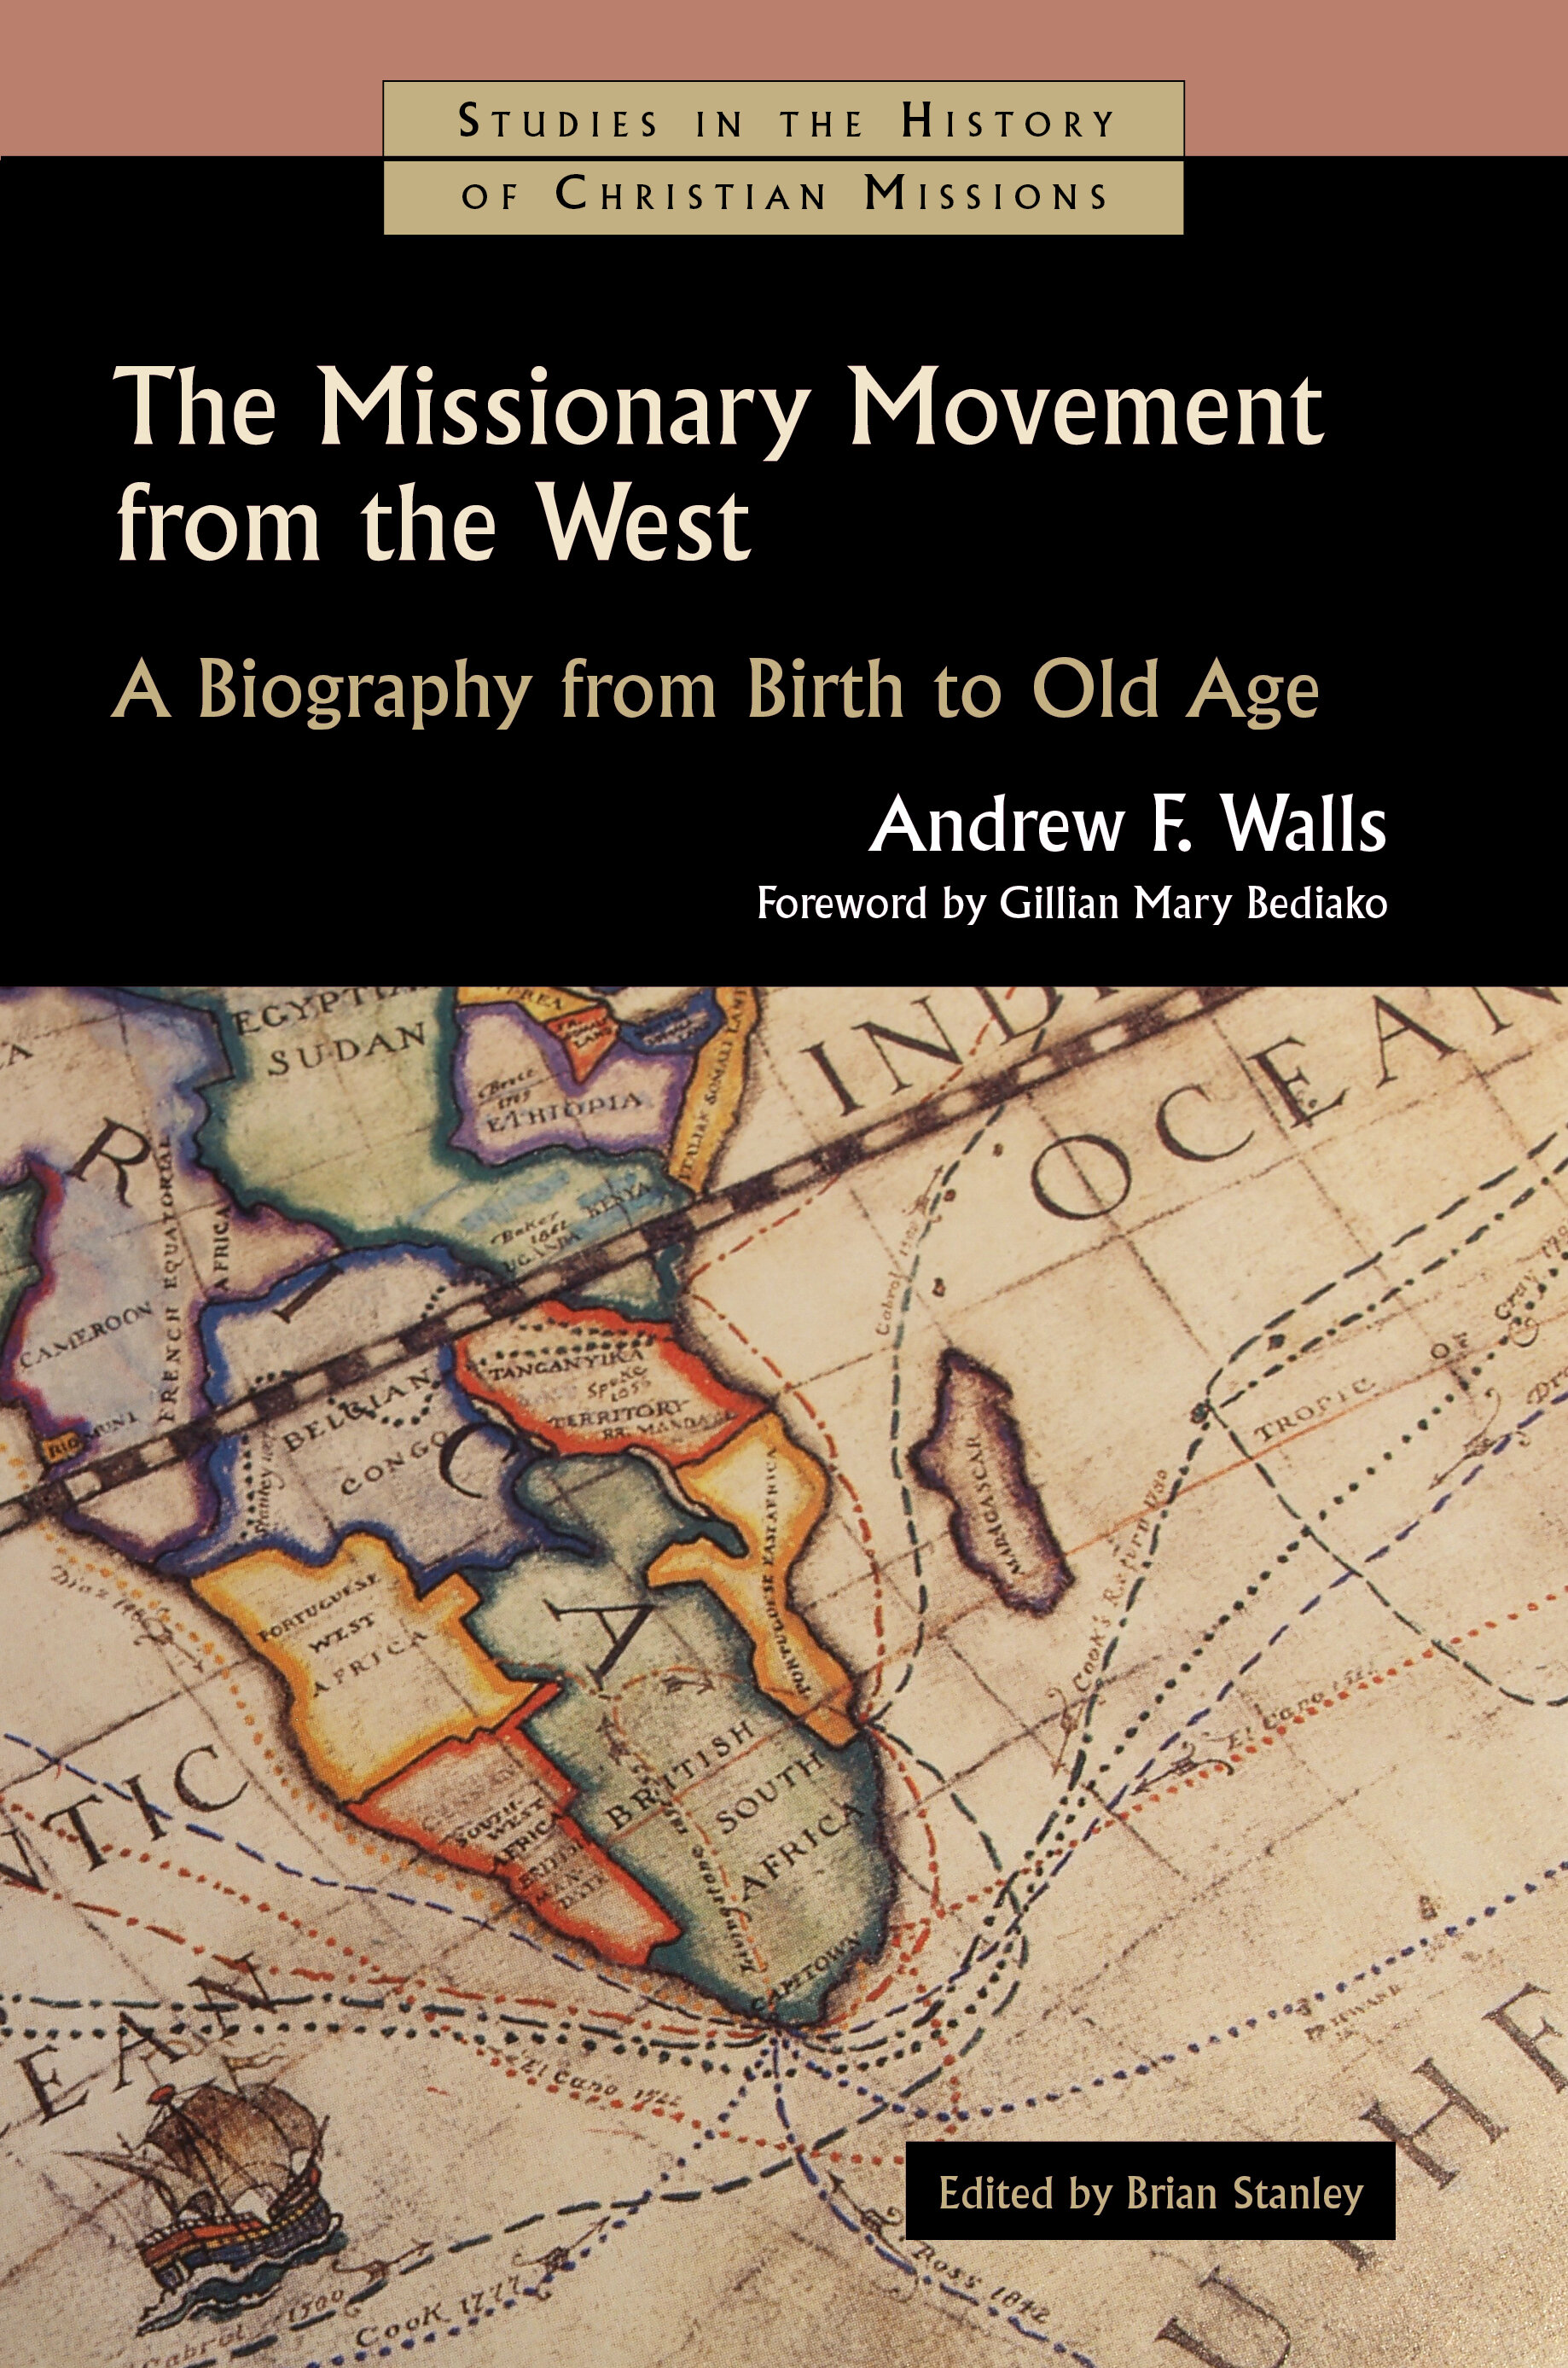 The Missionary Movement from the West: A Biography from Birth to Old Age (Studies in the History of Christian Missions | SHCM)